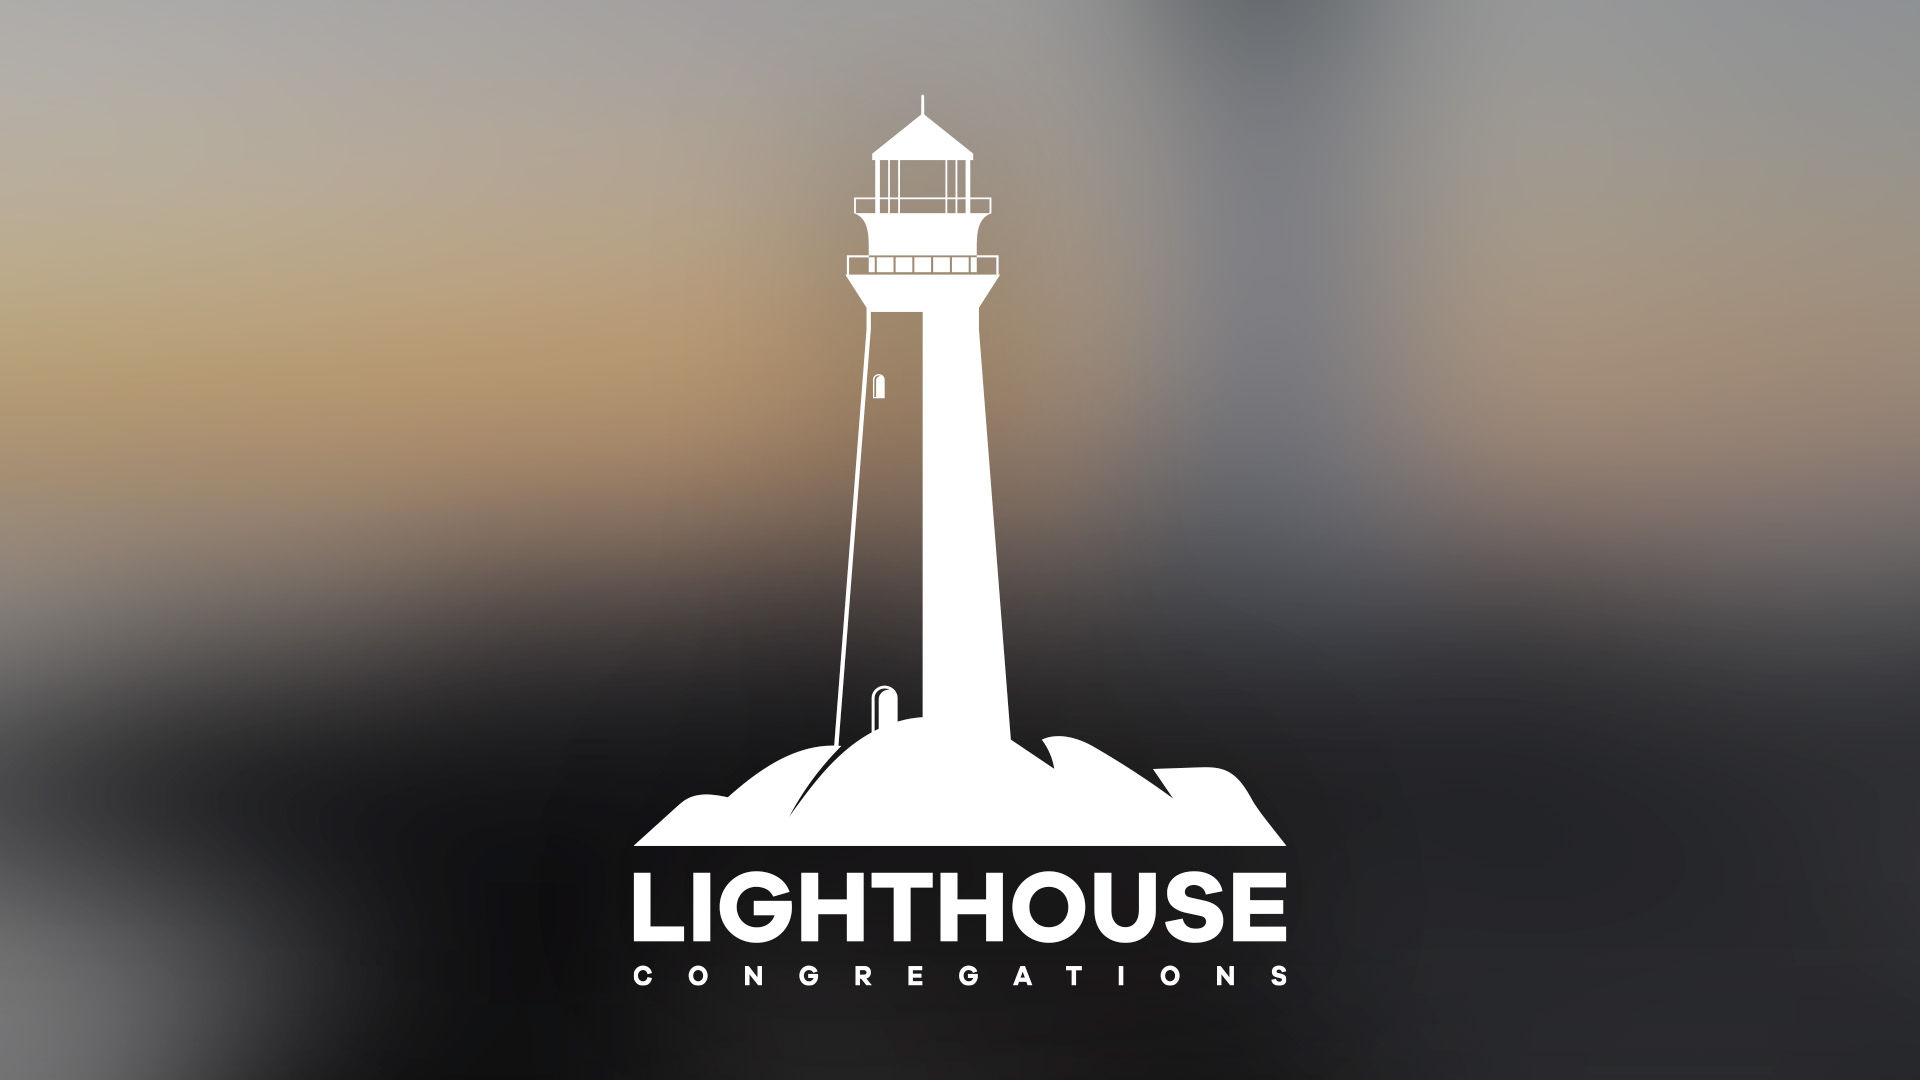 Lighthouse Congregations logo on a blurred background